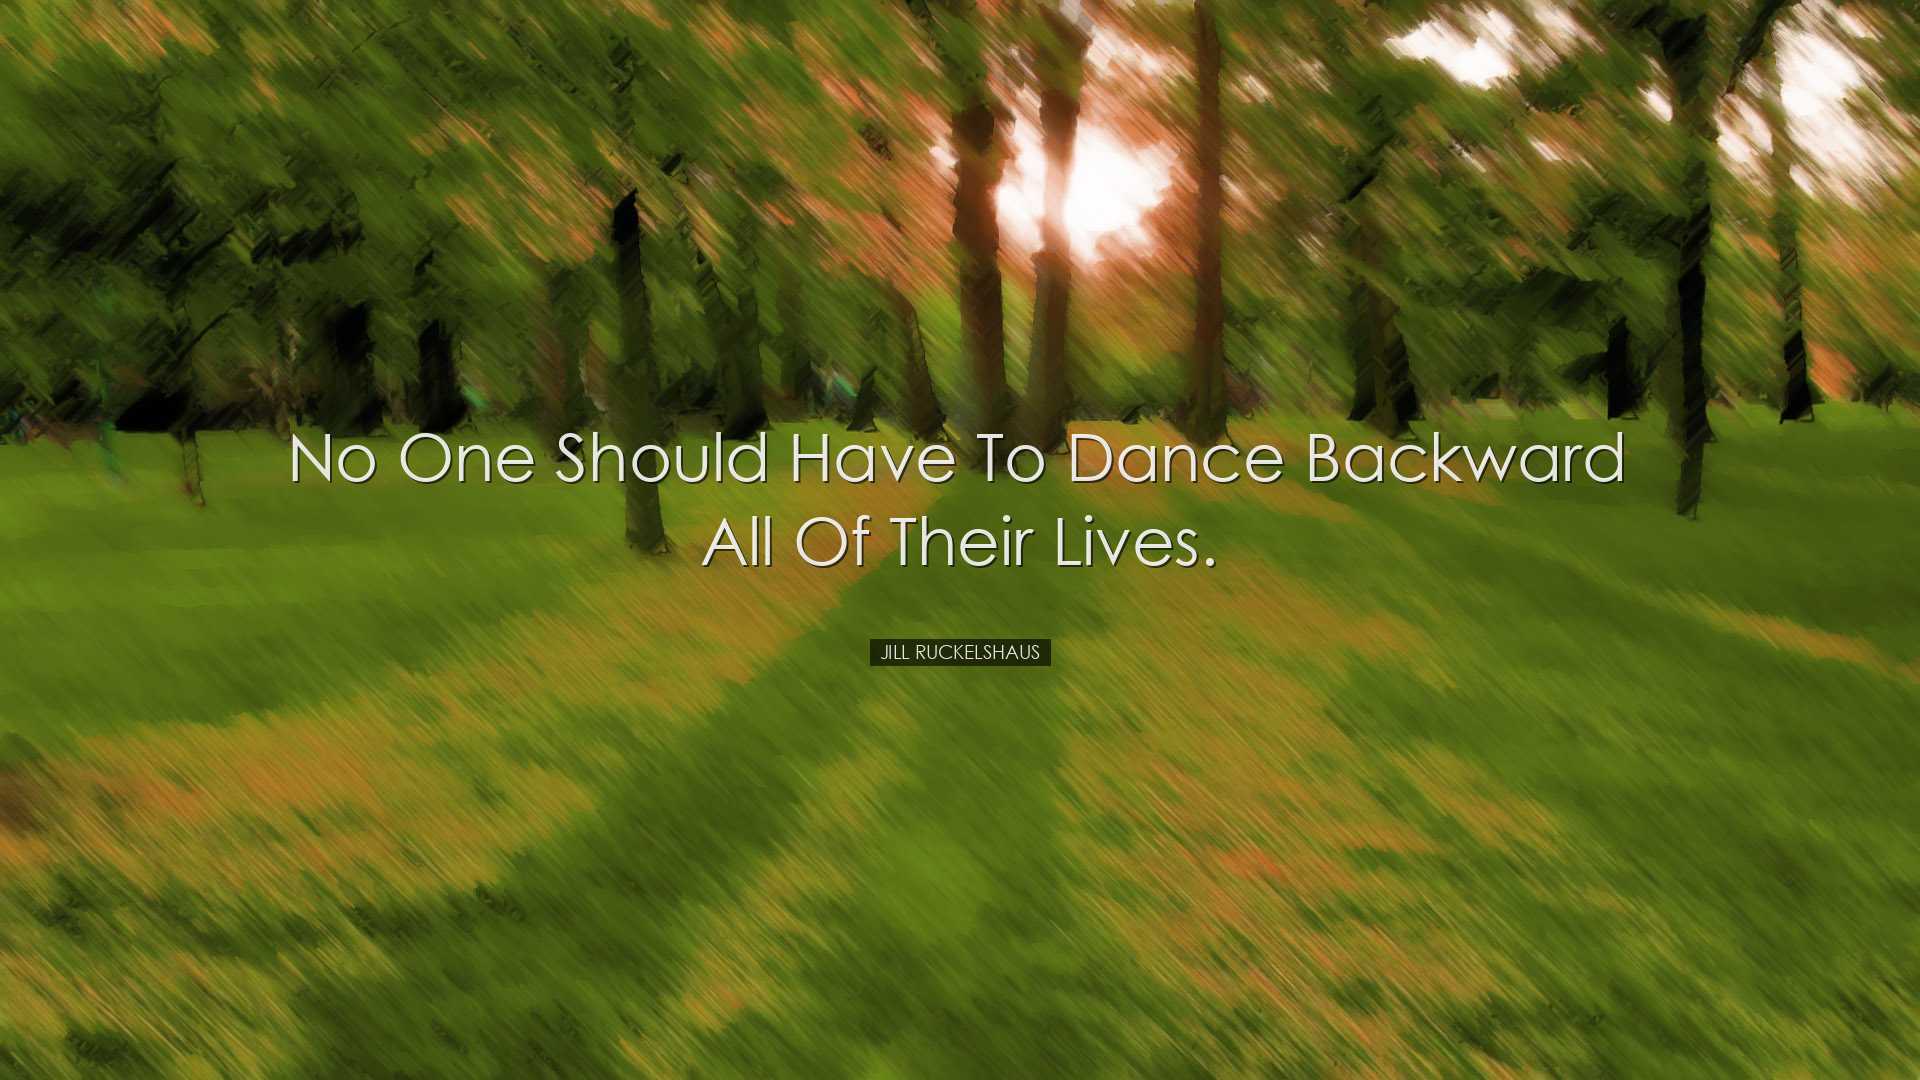 No one should have to dance backward all of their lives. - Jill Ru